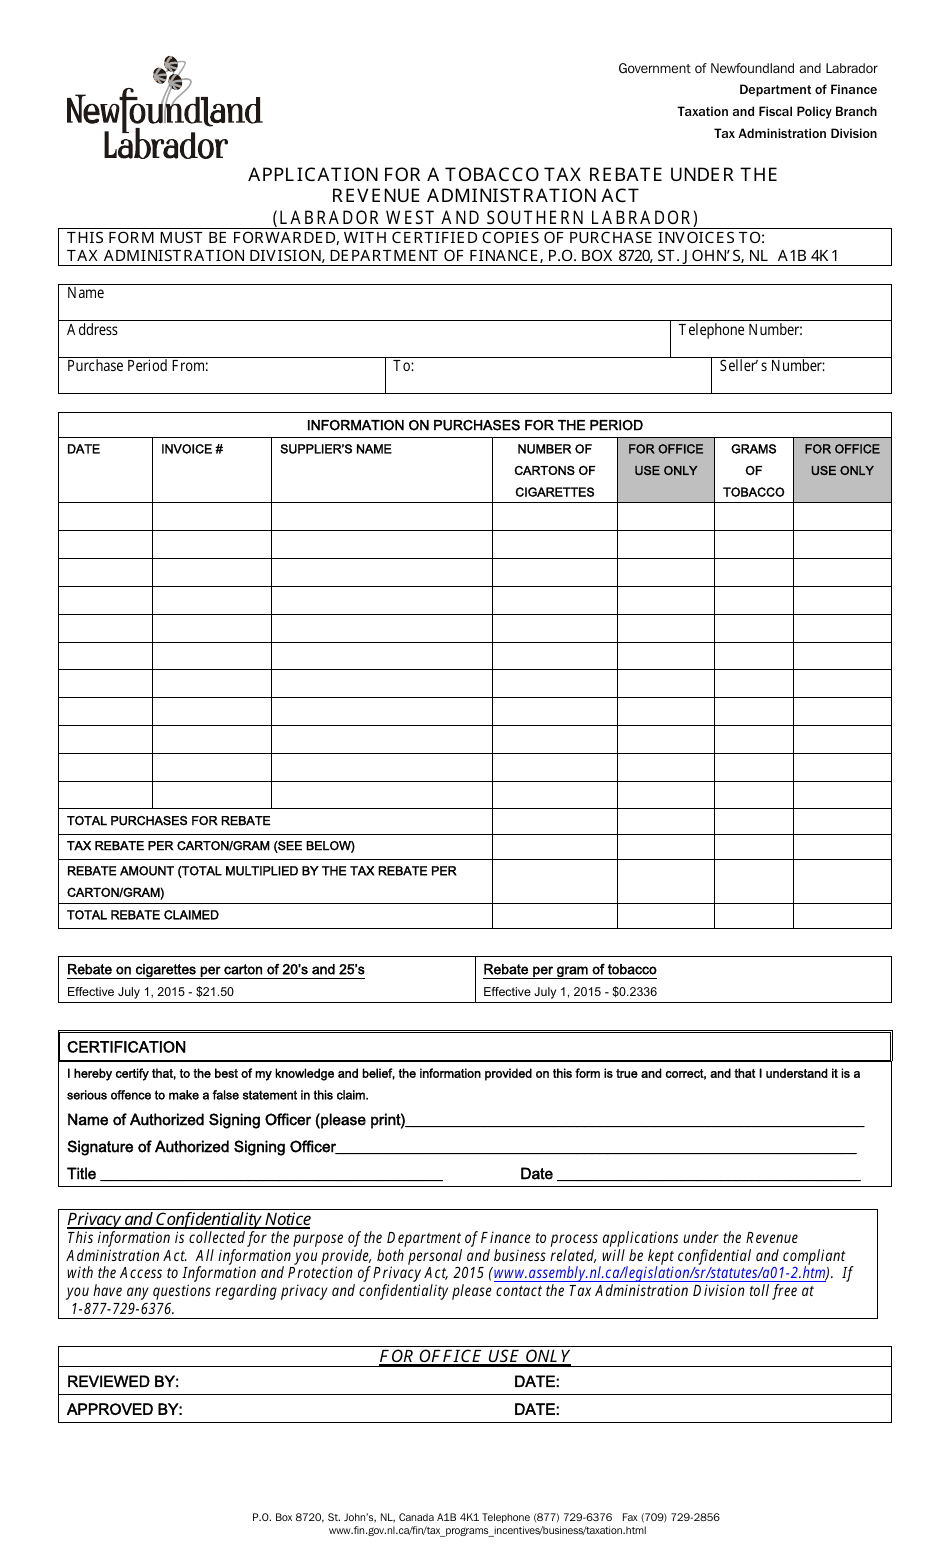 Application for a Tobacco Tax Rebate Under the Revenue Administration Act - Newfoundland and Labrador, Canada, Page 1